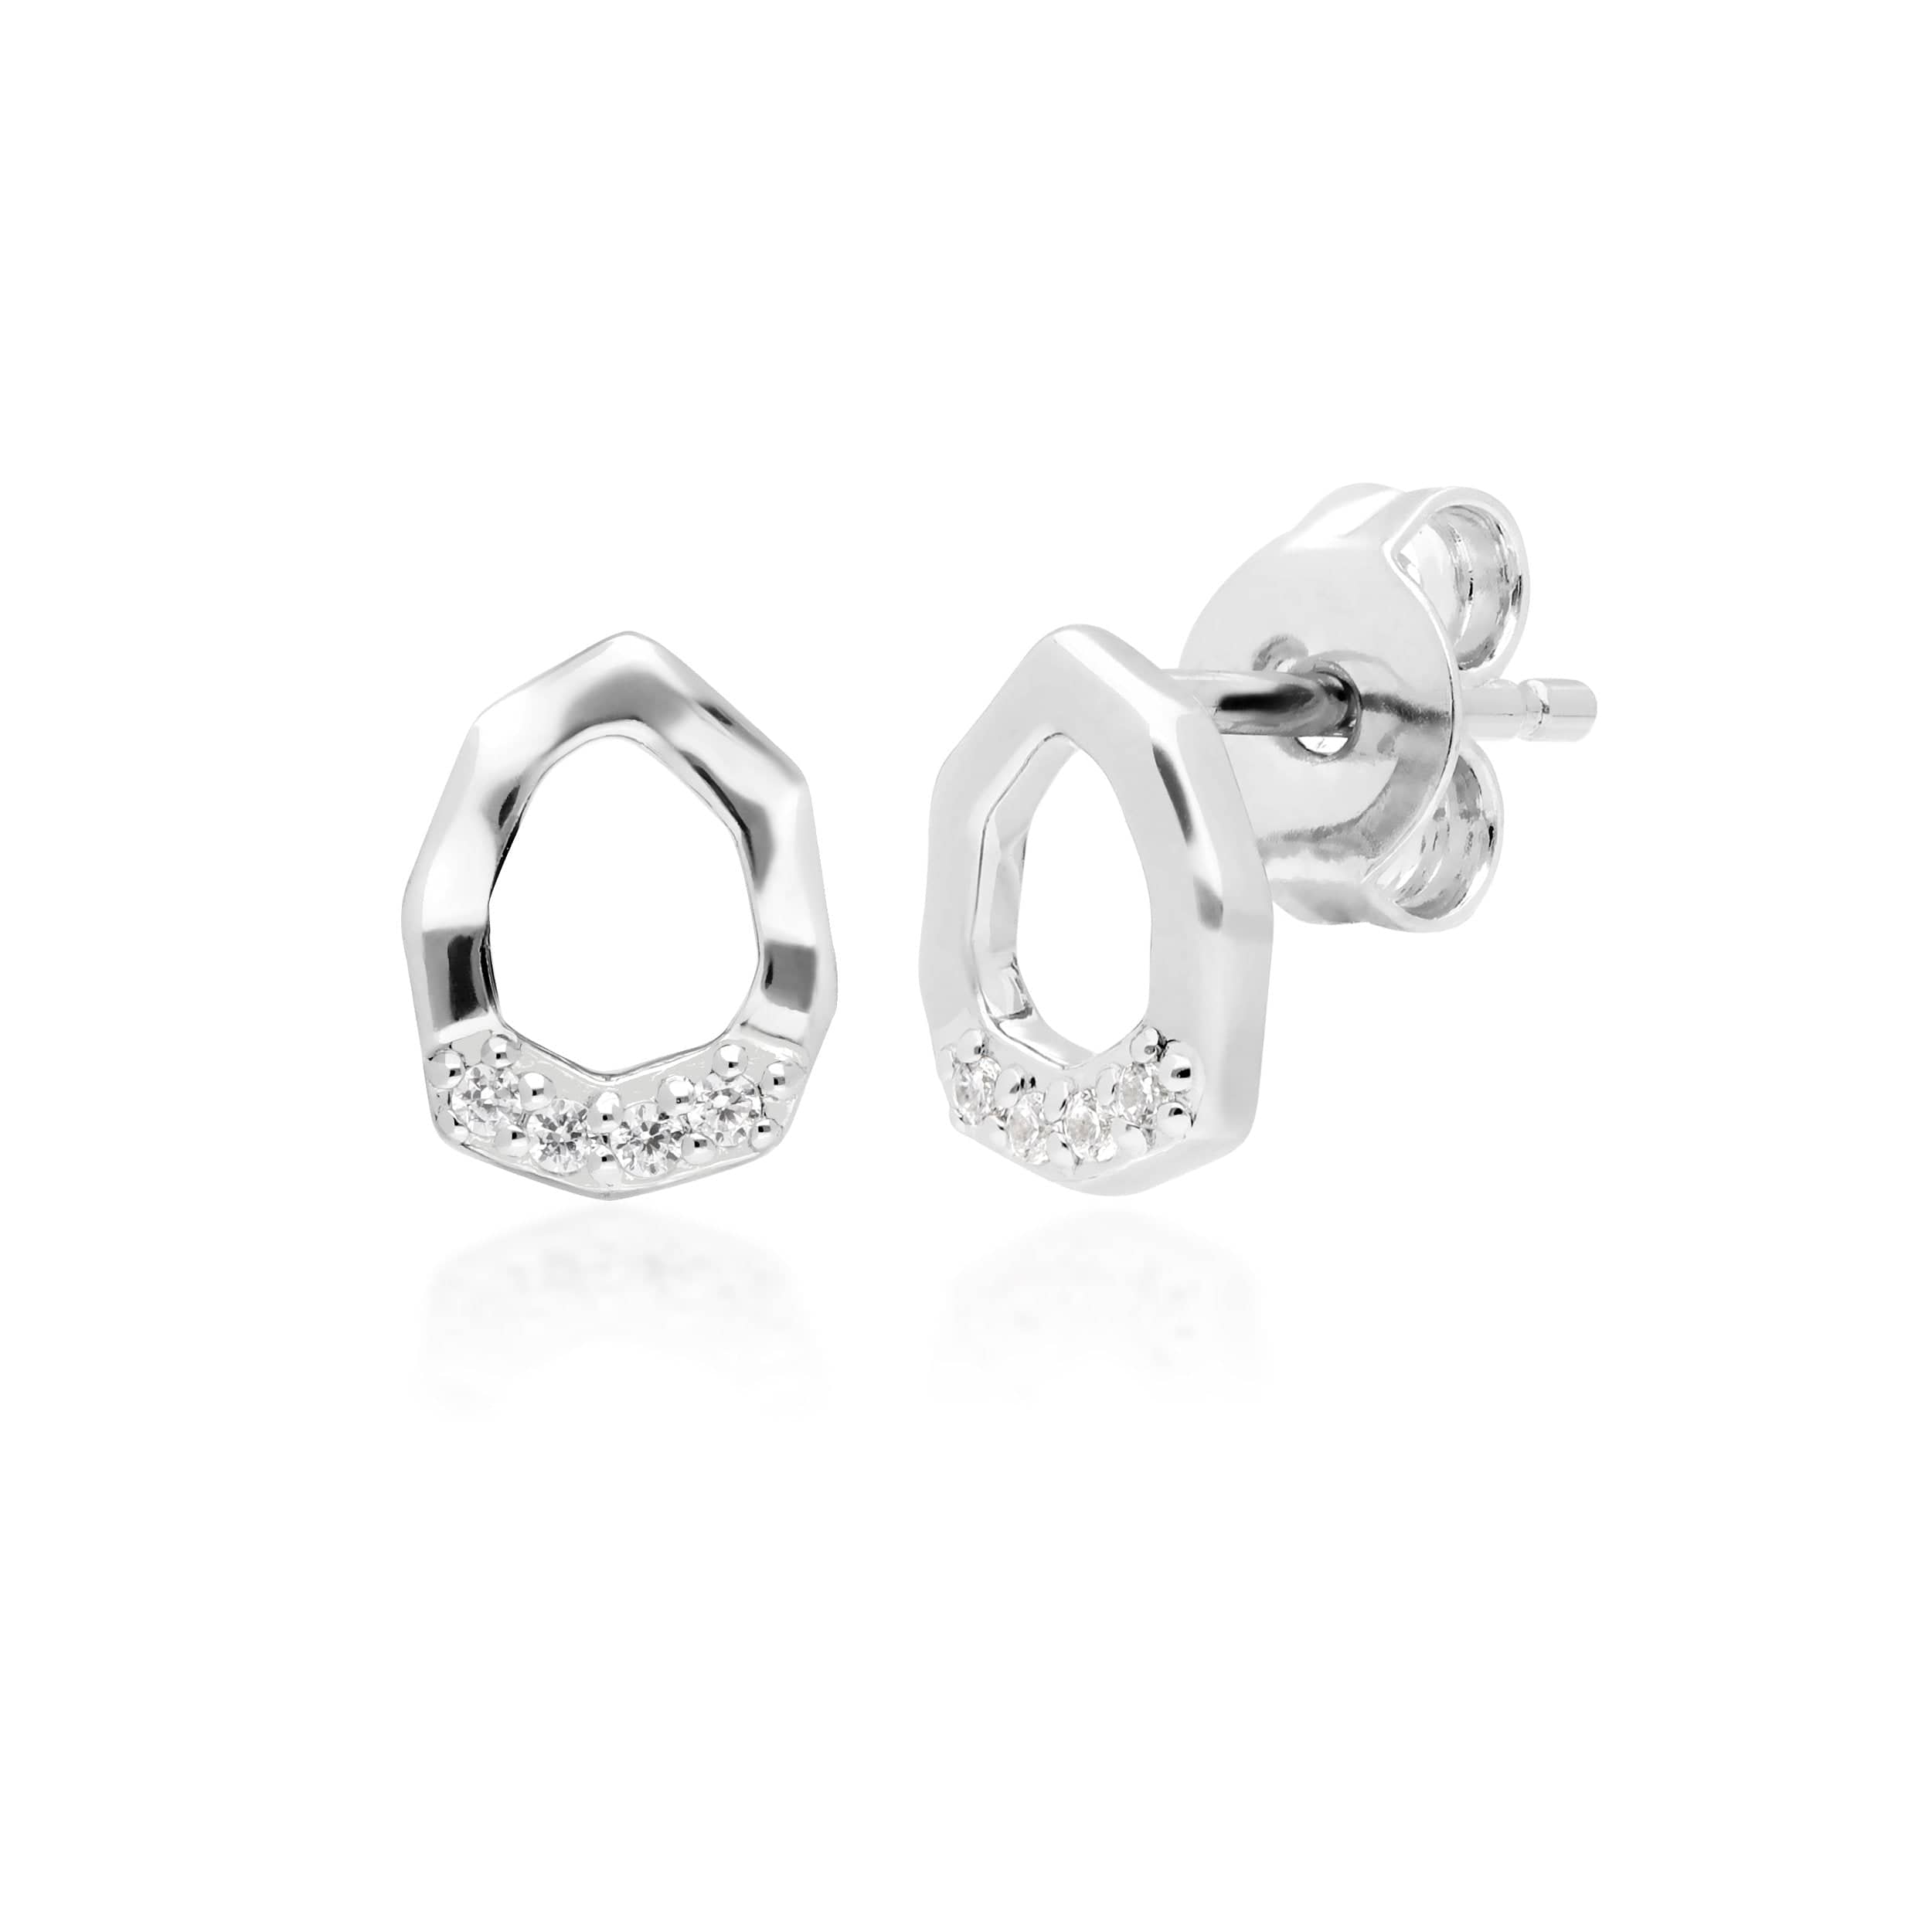 Image of Diamond Pave Asymmetric Stud Earrings in 9ct White Gold